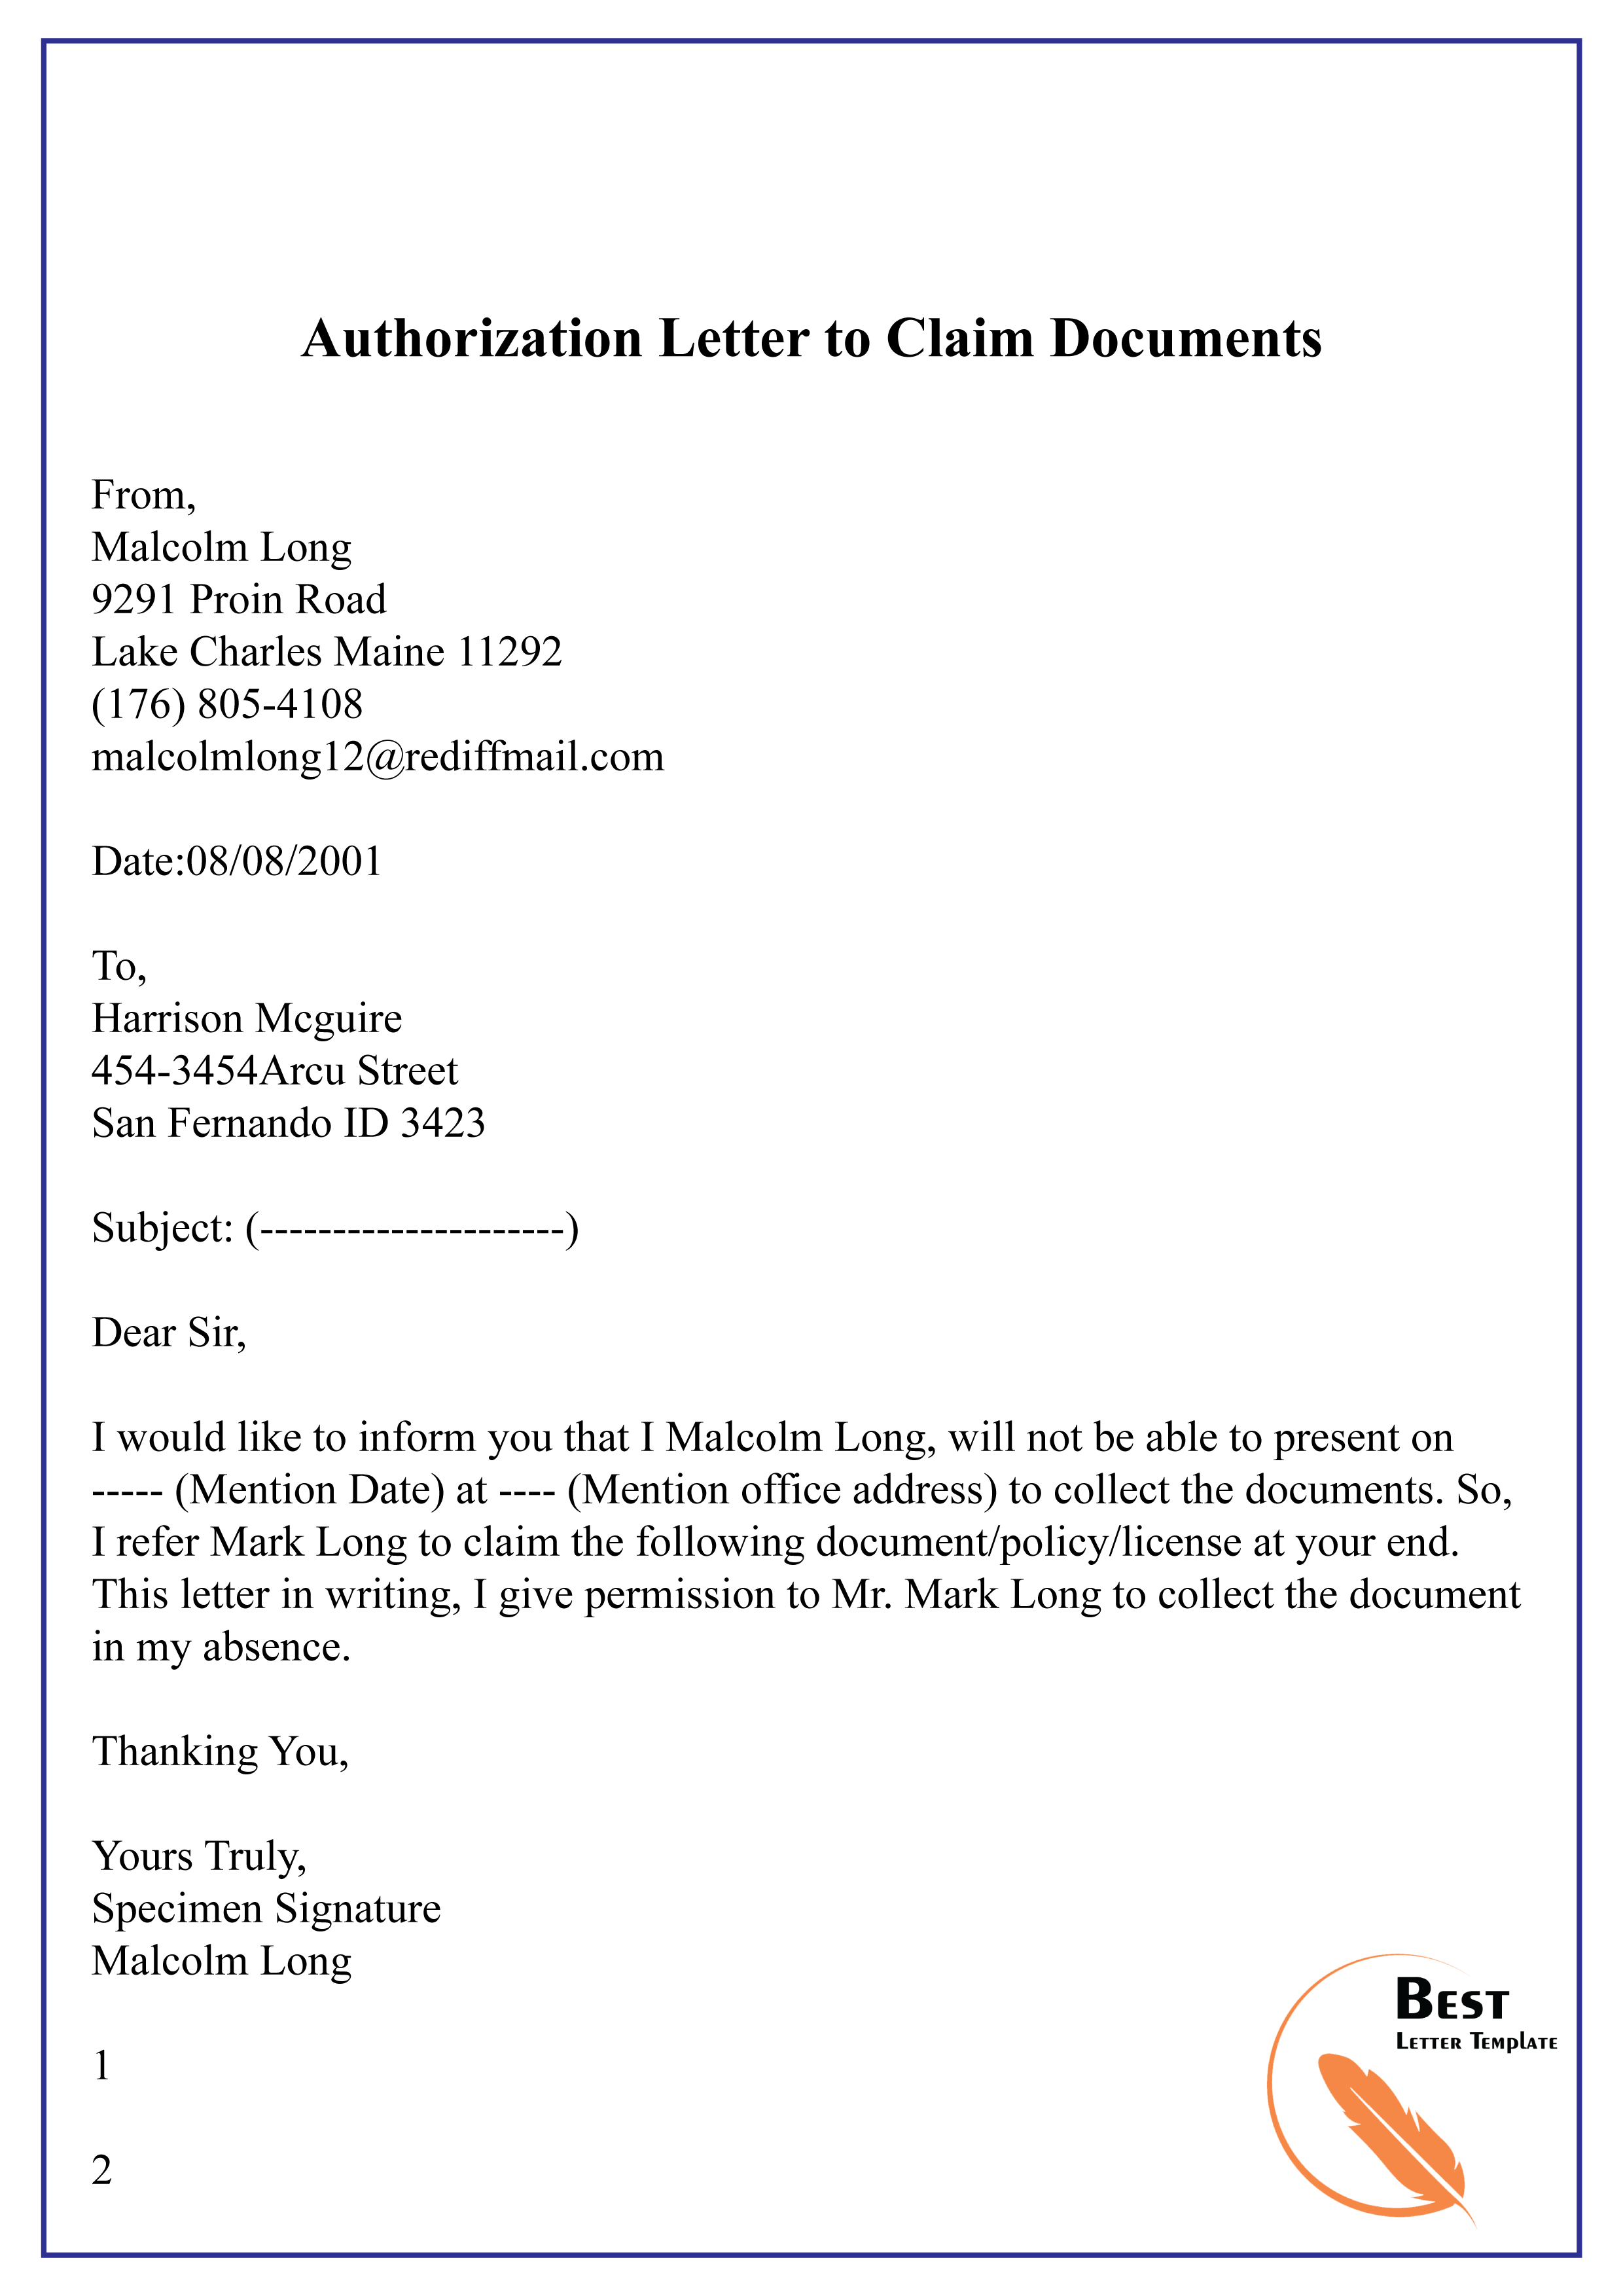 Authorization Letter To Claim Documents 01 